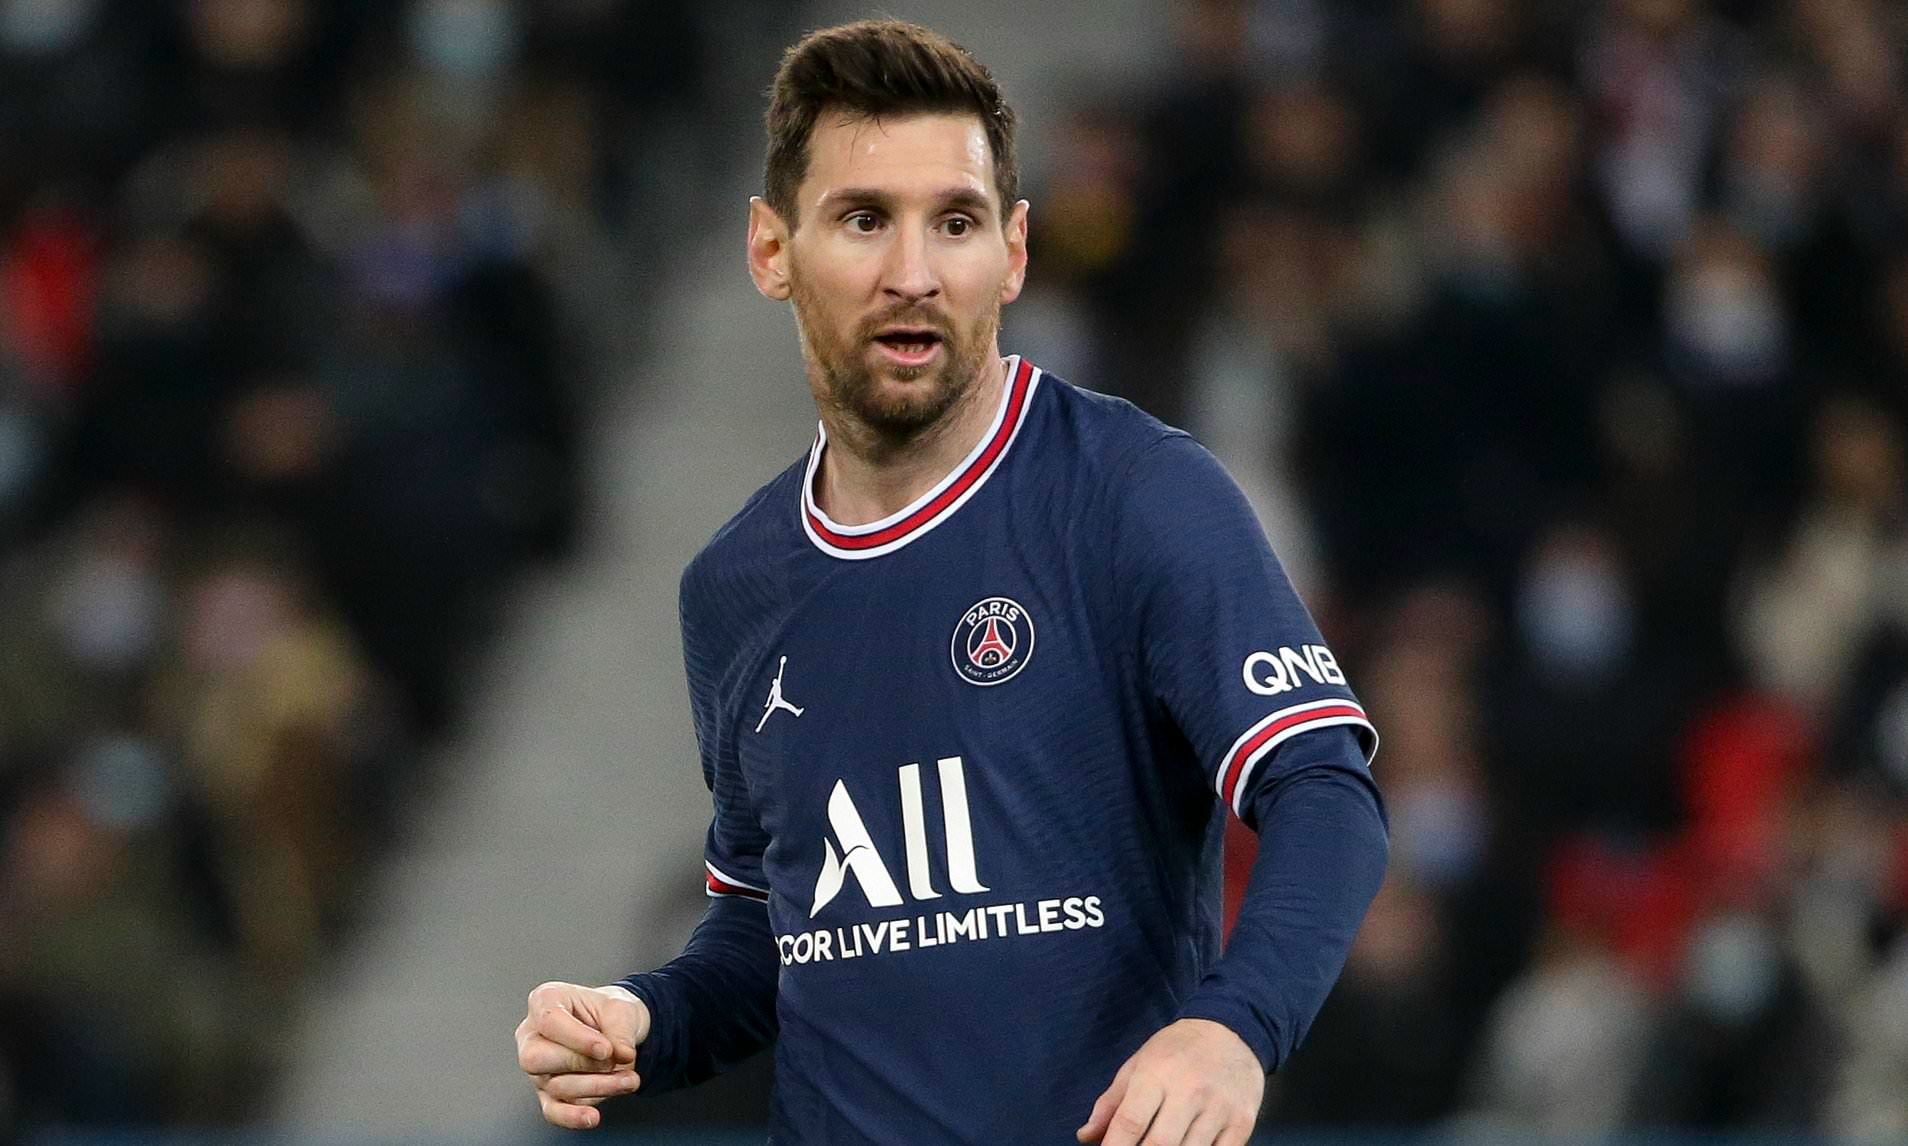 PSG Make Messi Good Offer to Extend Contract Despite Training Suspension